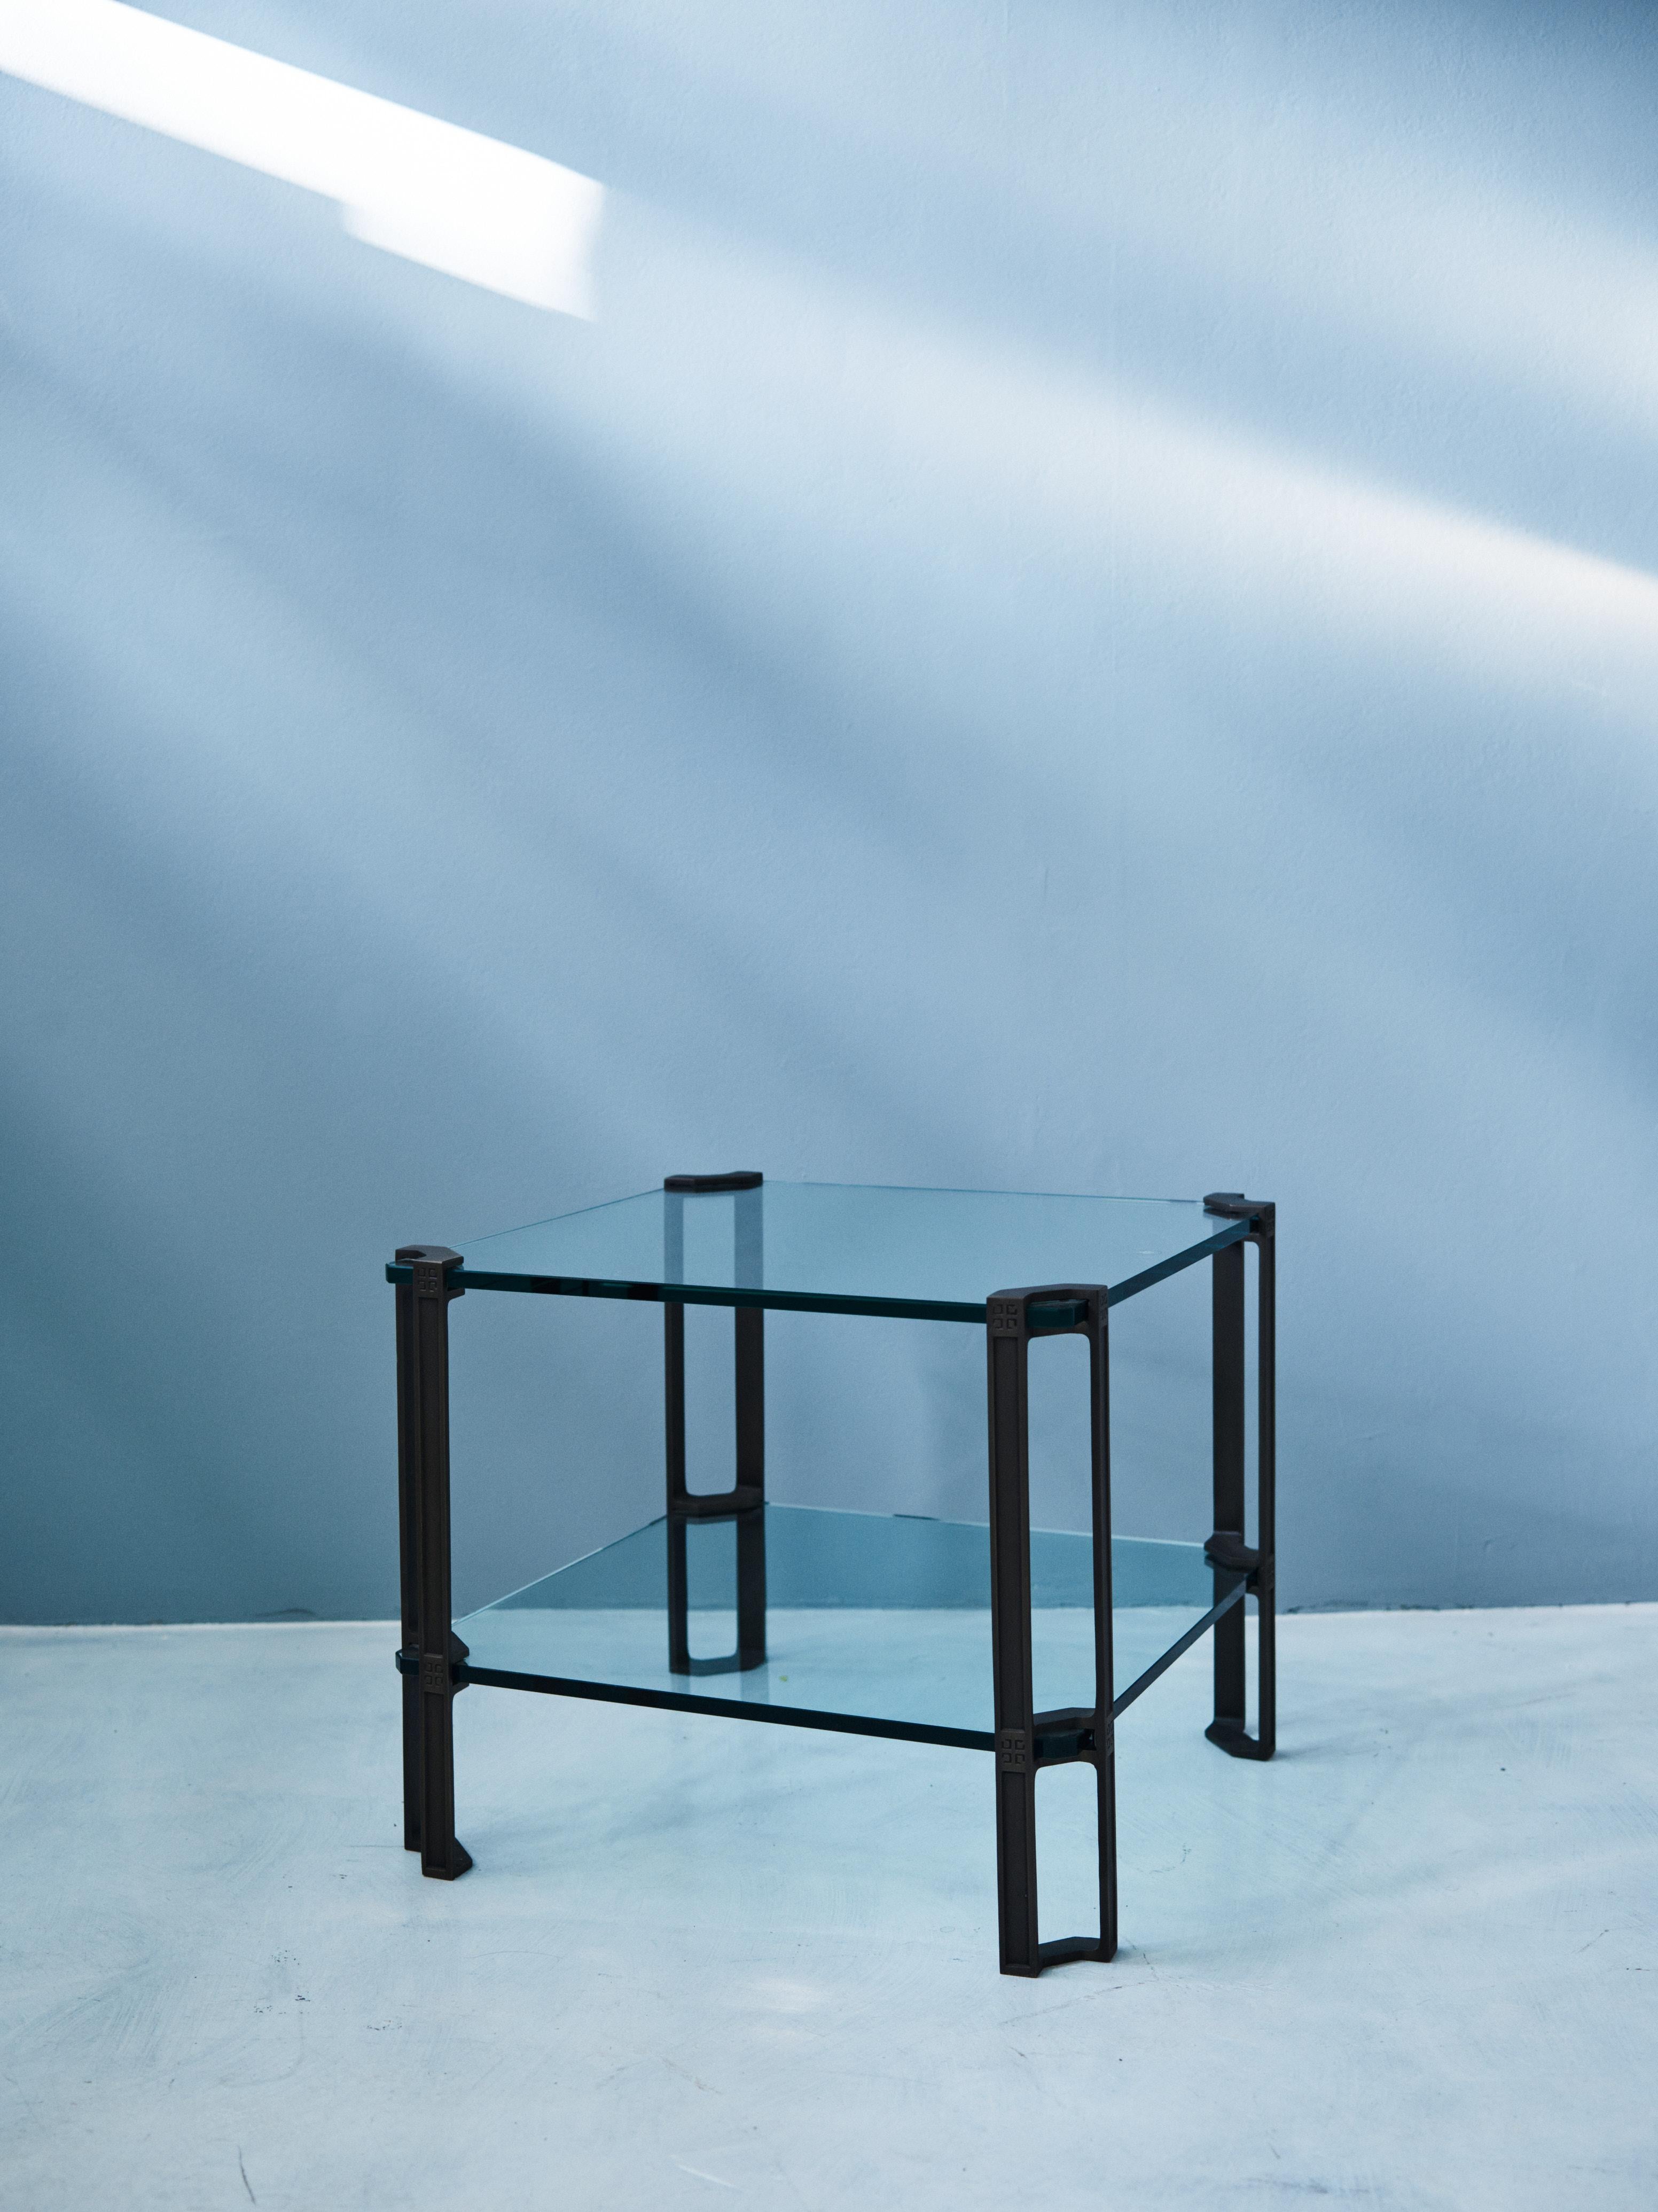 This mid-century modern glass table with casted brass framing was designed by Peter Ghyczy in 1976 and hand-made in the GHYCZY atelier in the South of the Netherlands. The table features Peter Ghyczy's 1973 trademarked casting and clamping